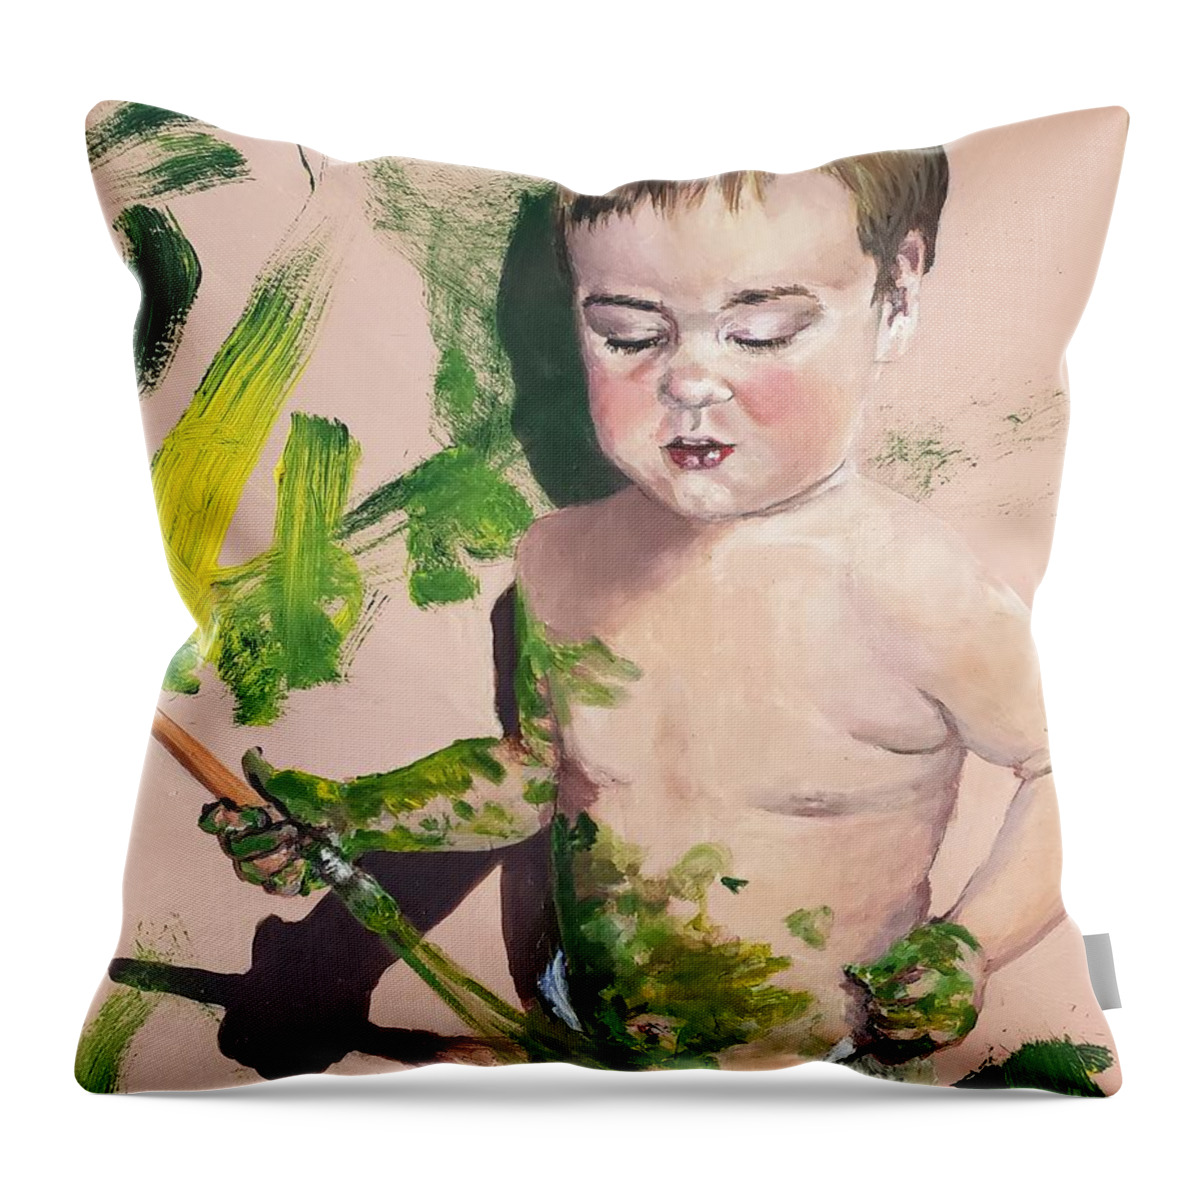 Selfie Throw Pillow featuring the painting Painting one's self by Merana Cadorette